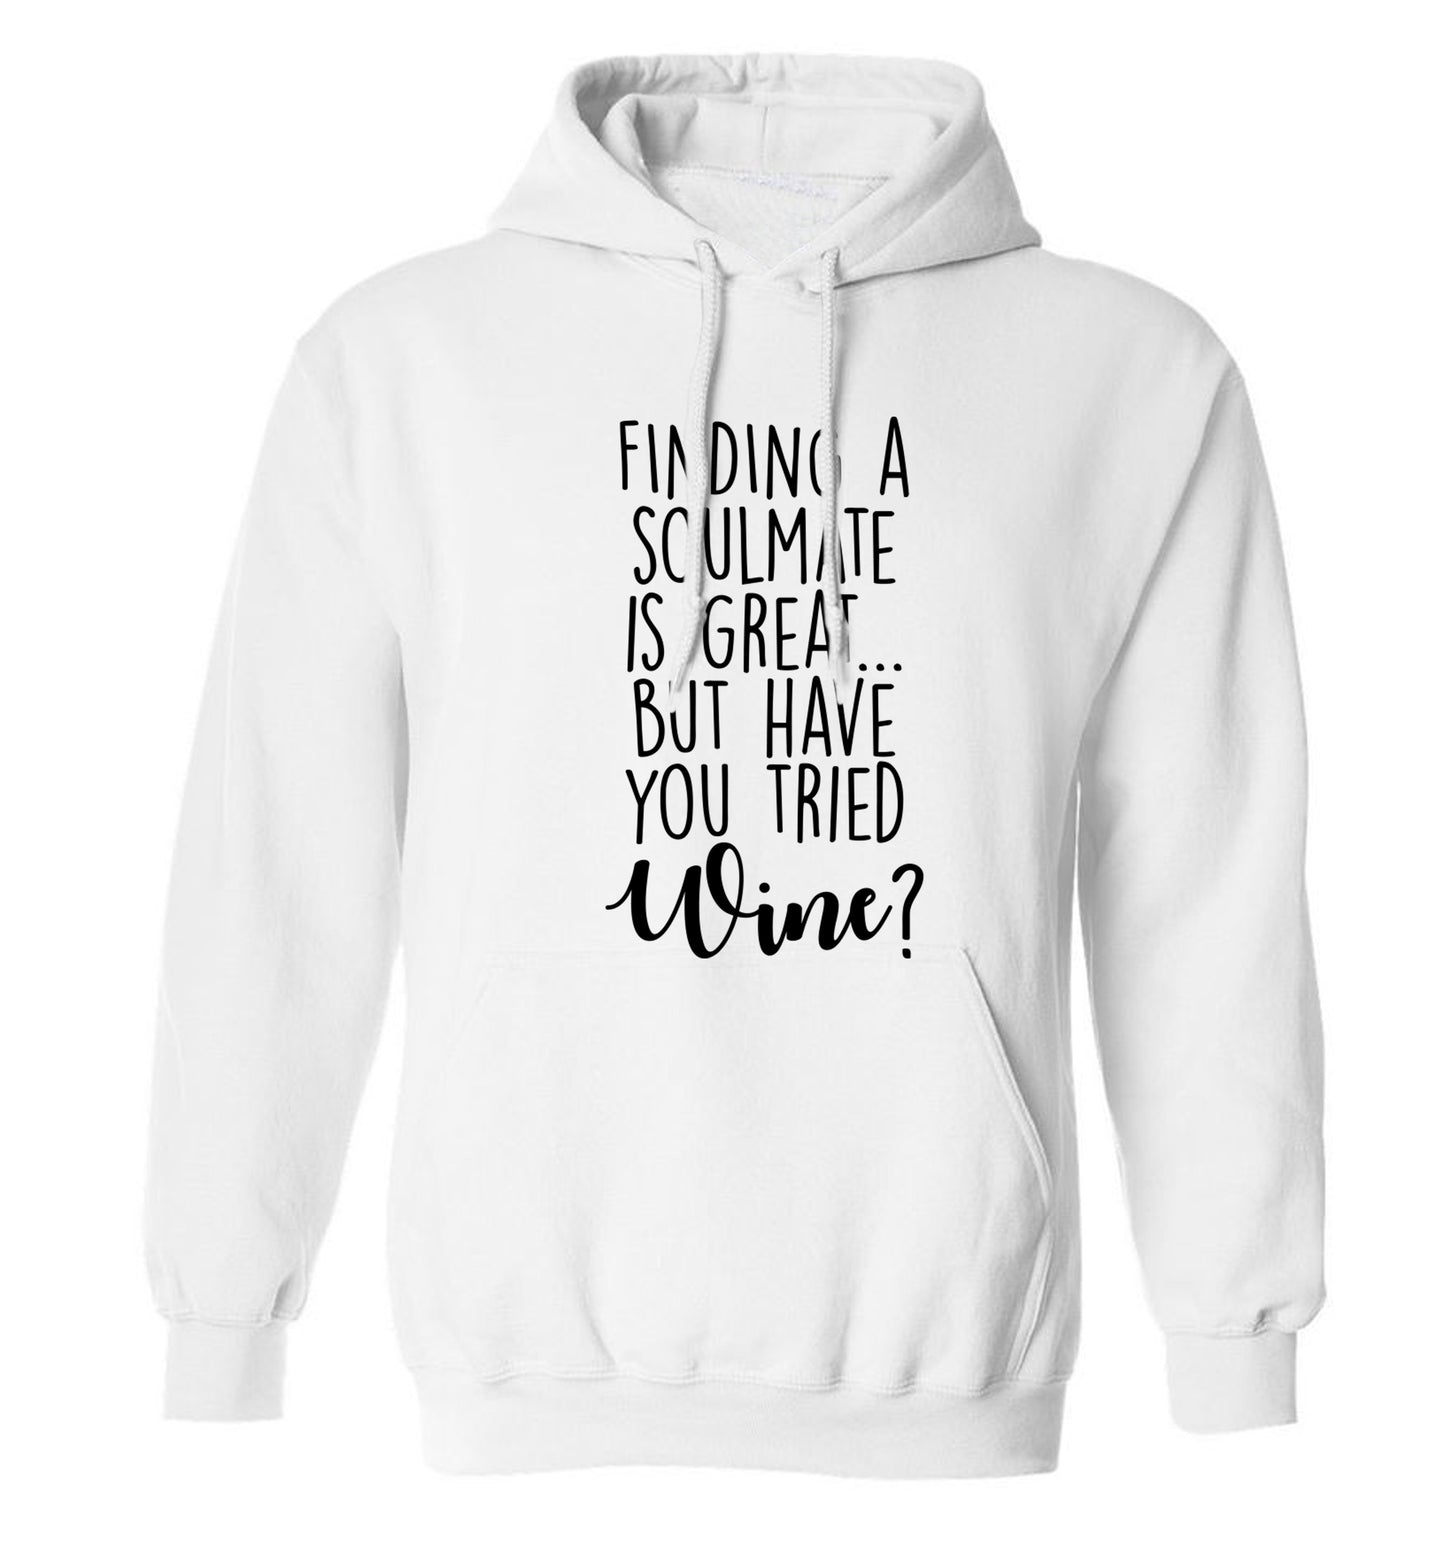 Finding a soulmate is great but have you tried wine? adults unisex white hoodie 2XL